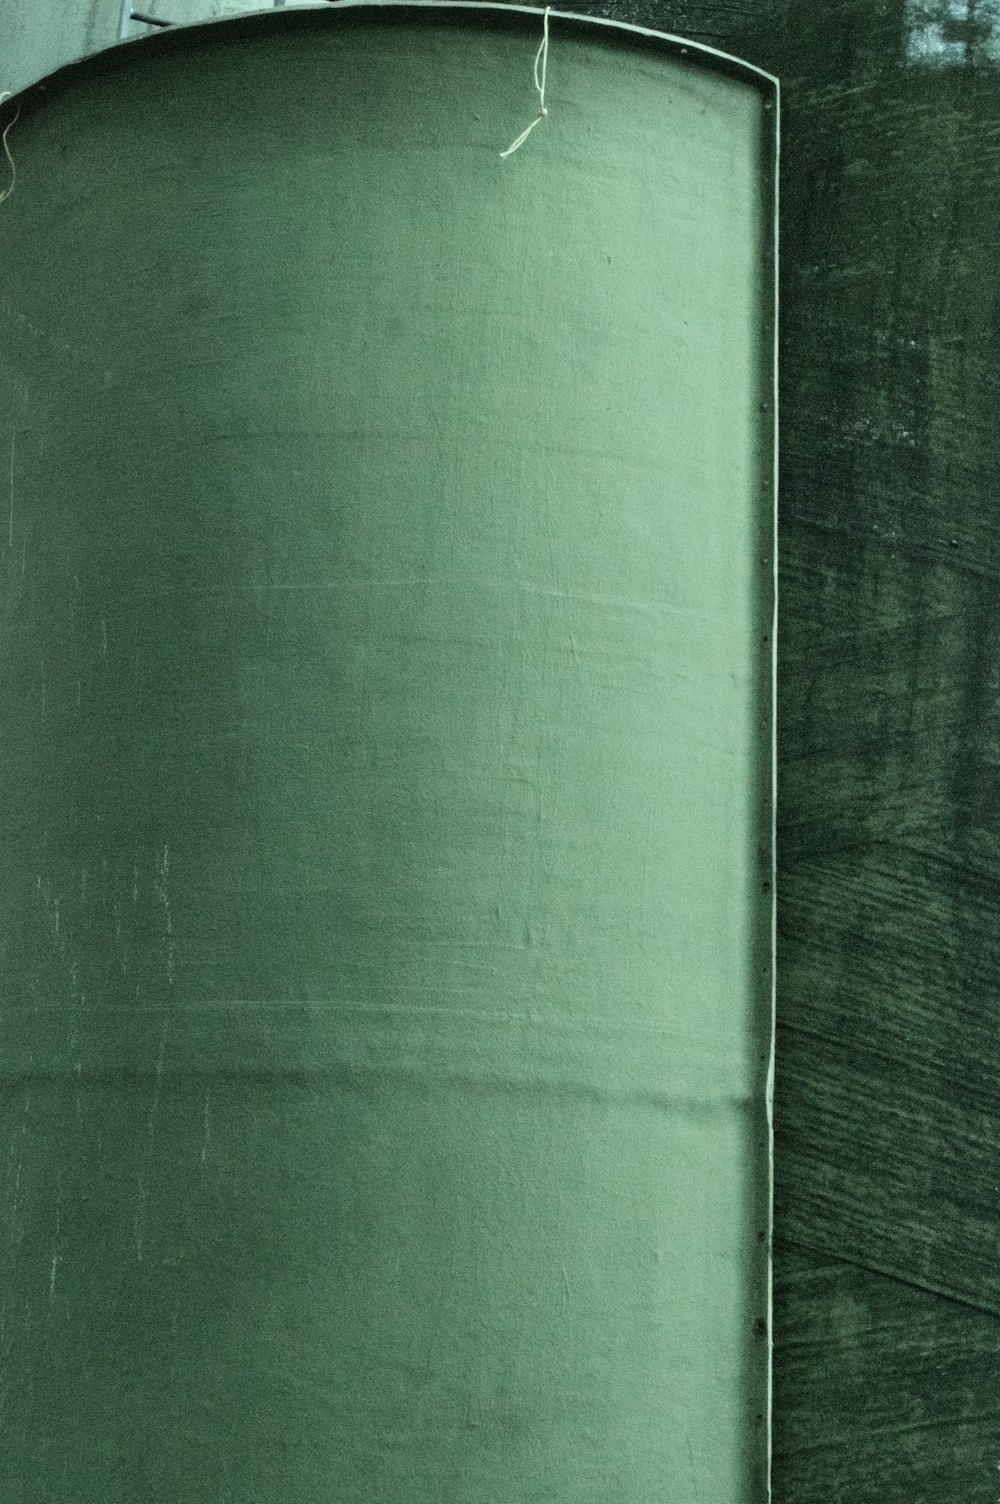 green textile on brown wooden table